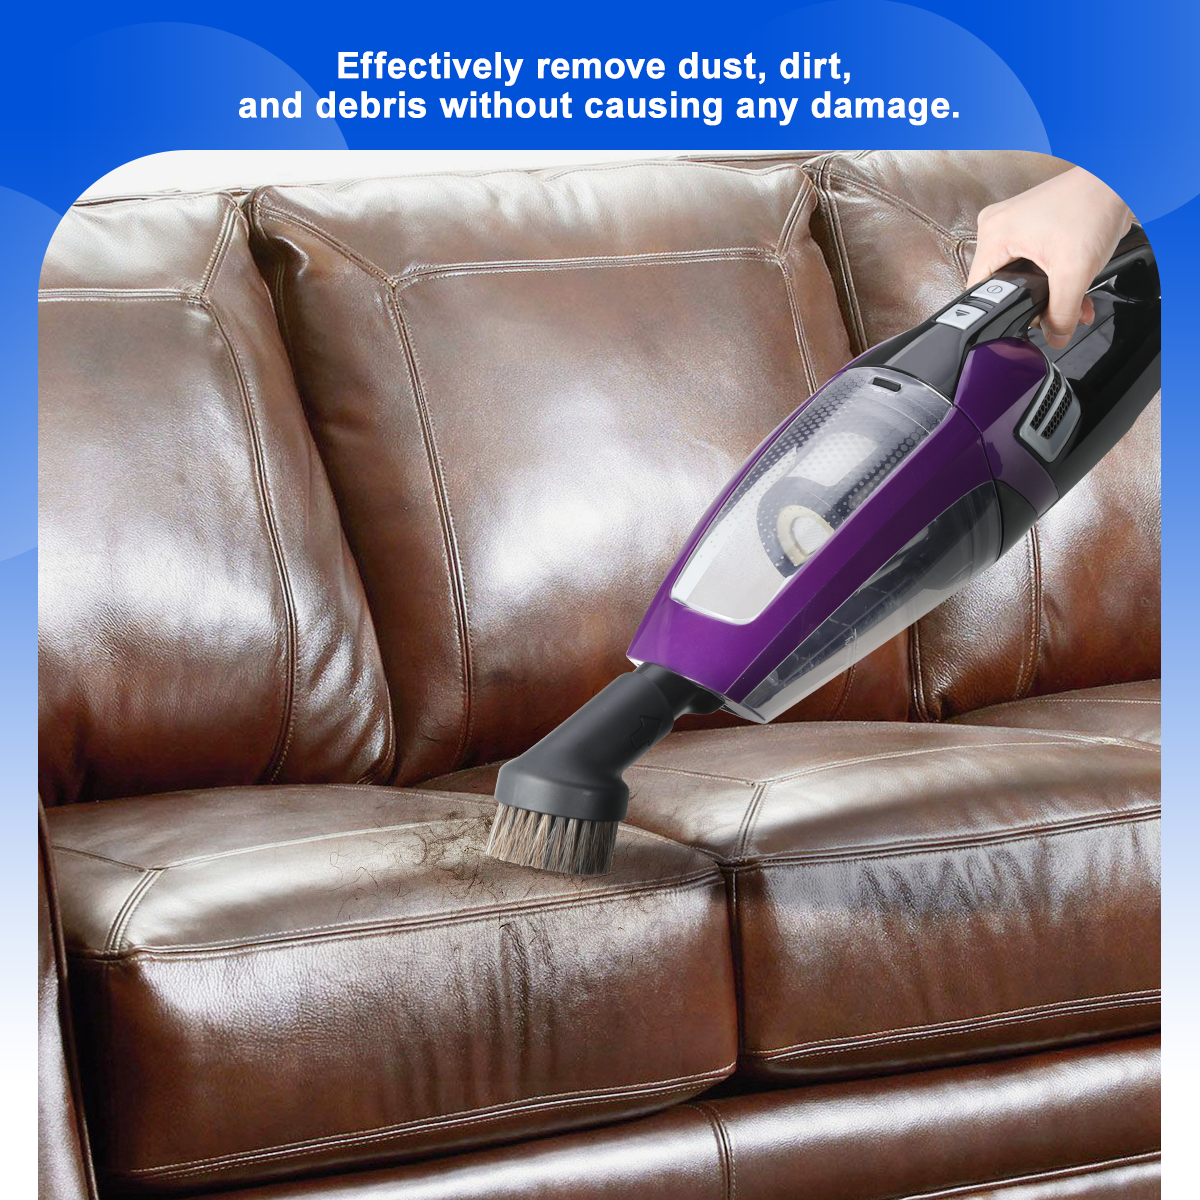 Vacuum cleaner with horsehair brush for better cleaning results without any damage.